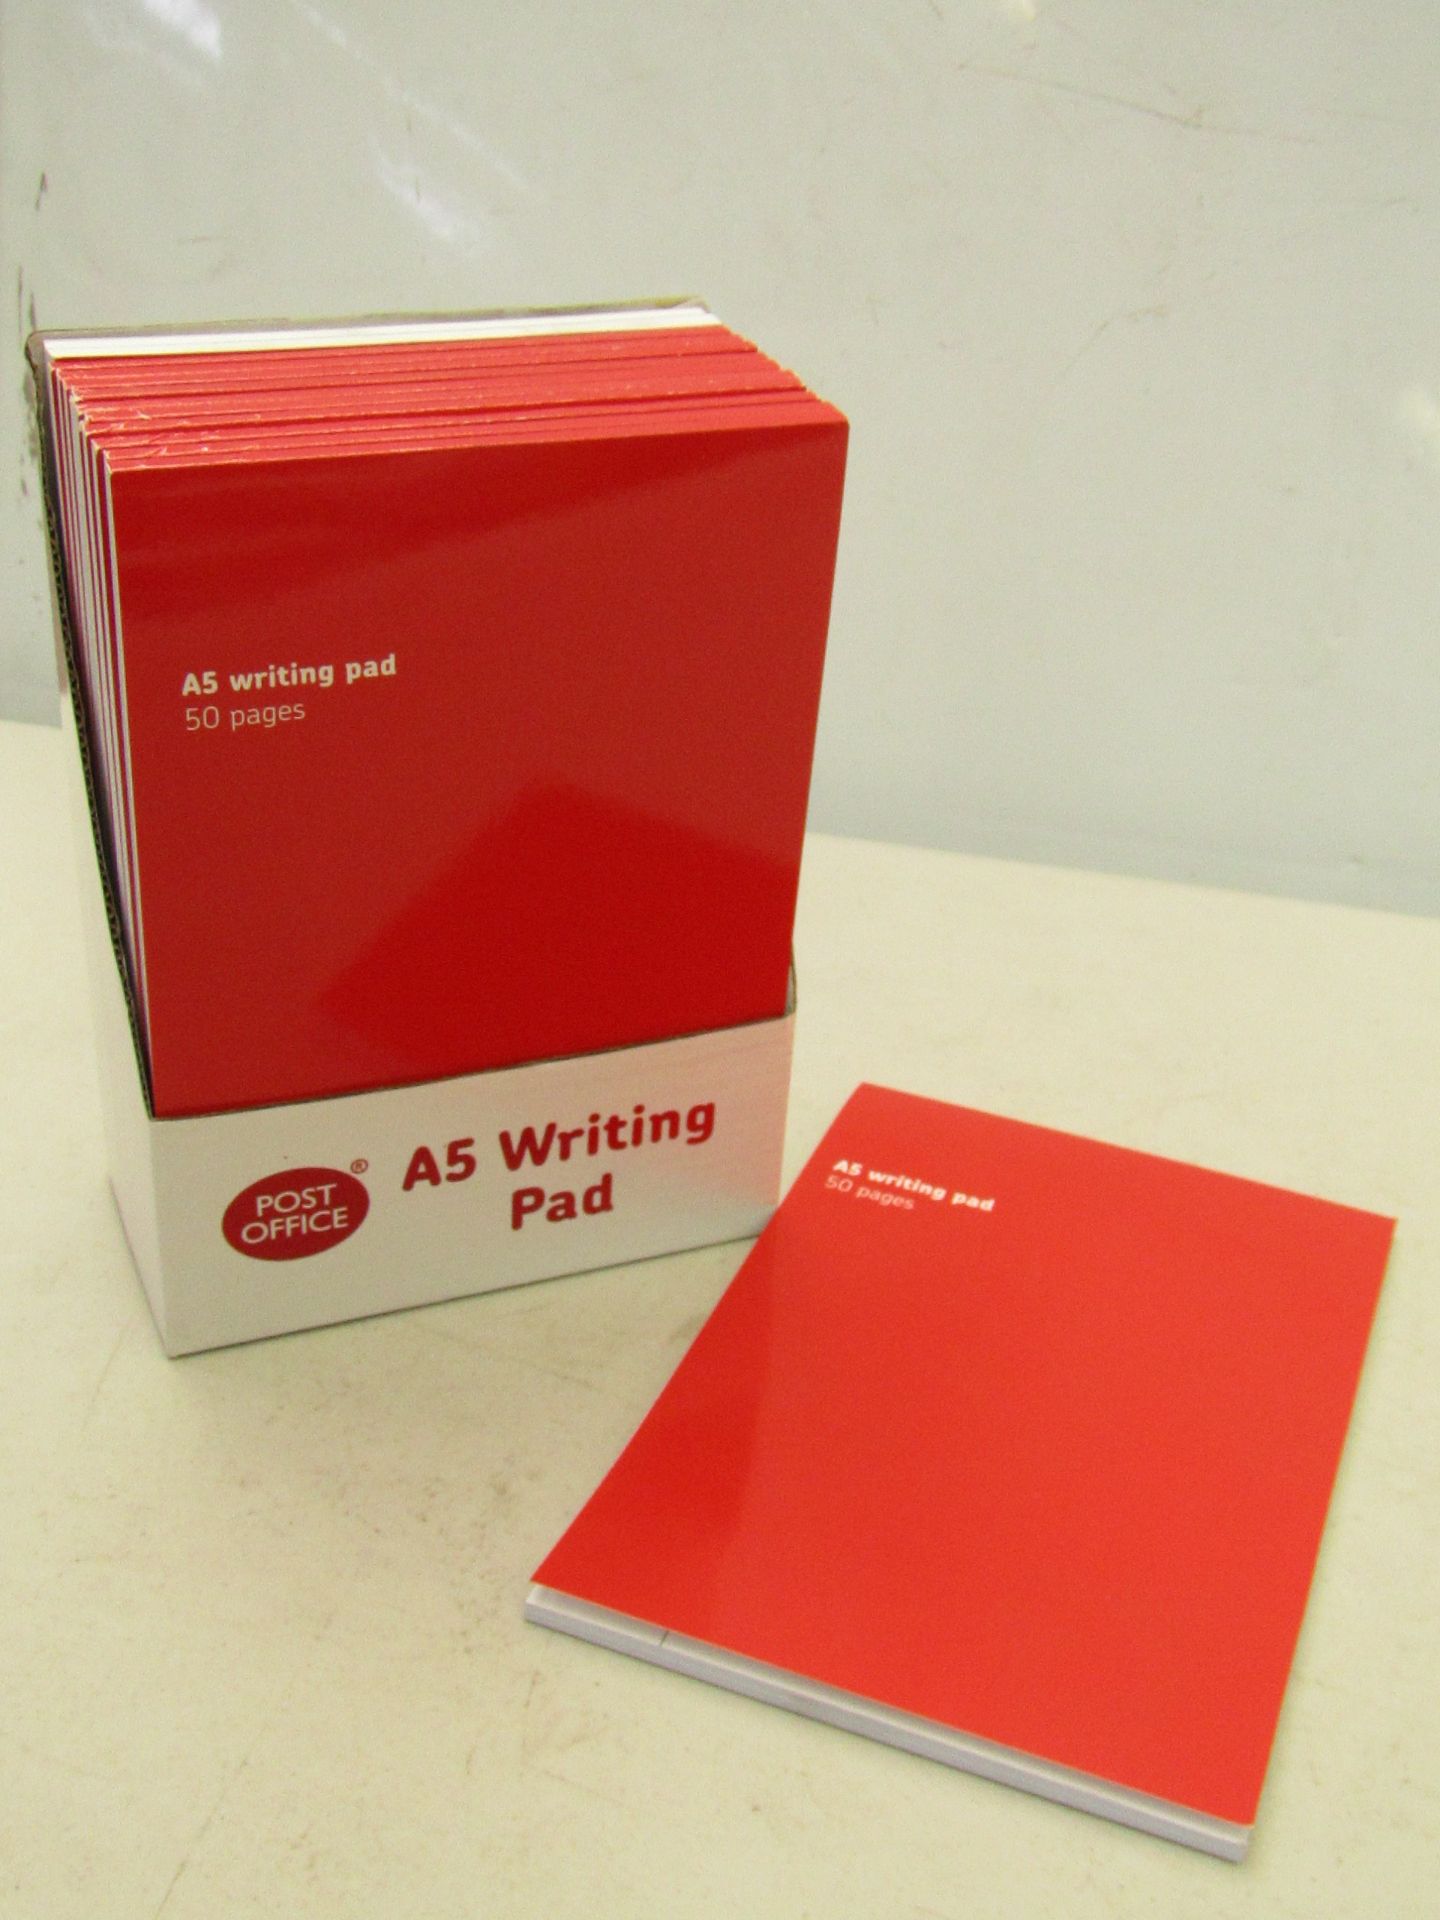 4x boxes of Post Office A5 writing pads. Each box contains 12x writing pads, each pad contains 50